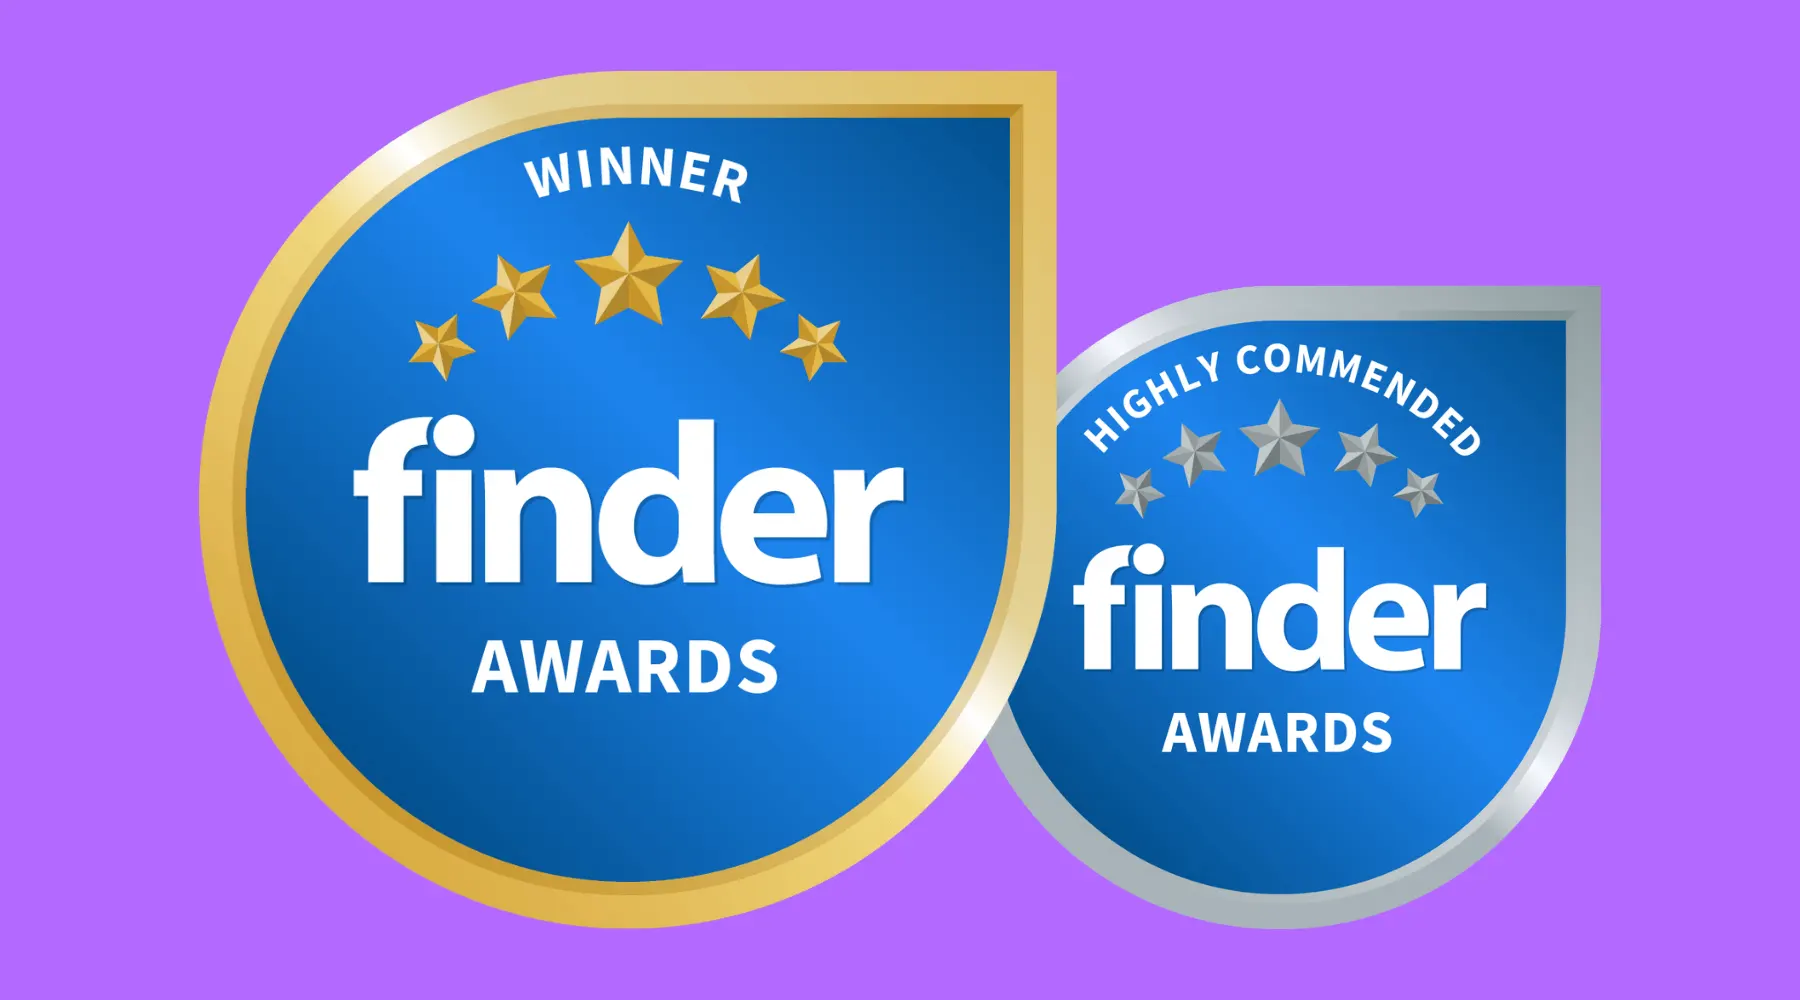 Blue, gold and silver Finder Awards badges on a purple background